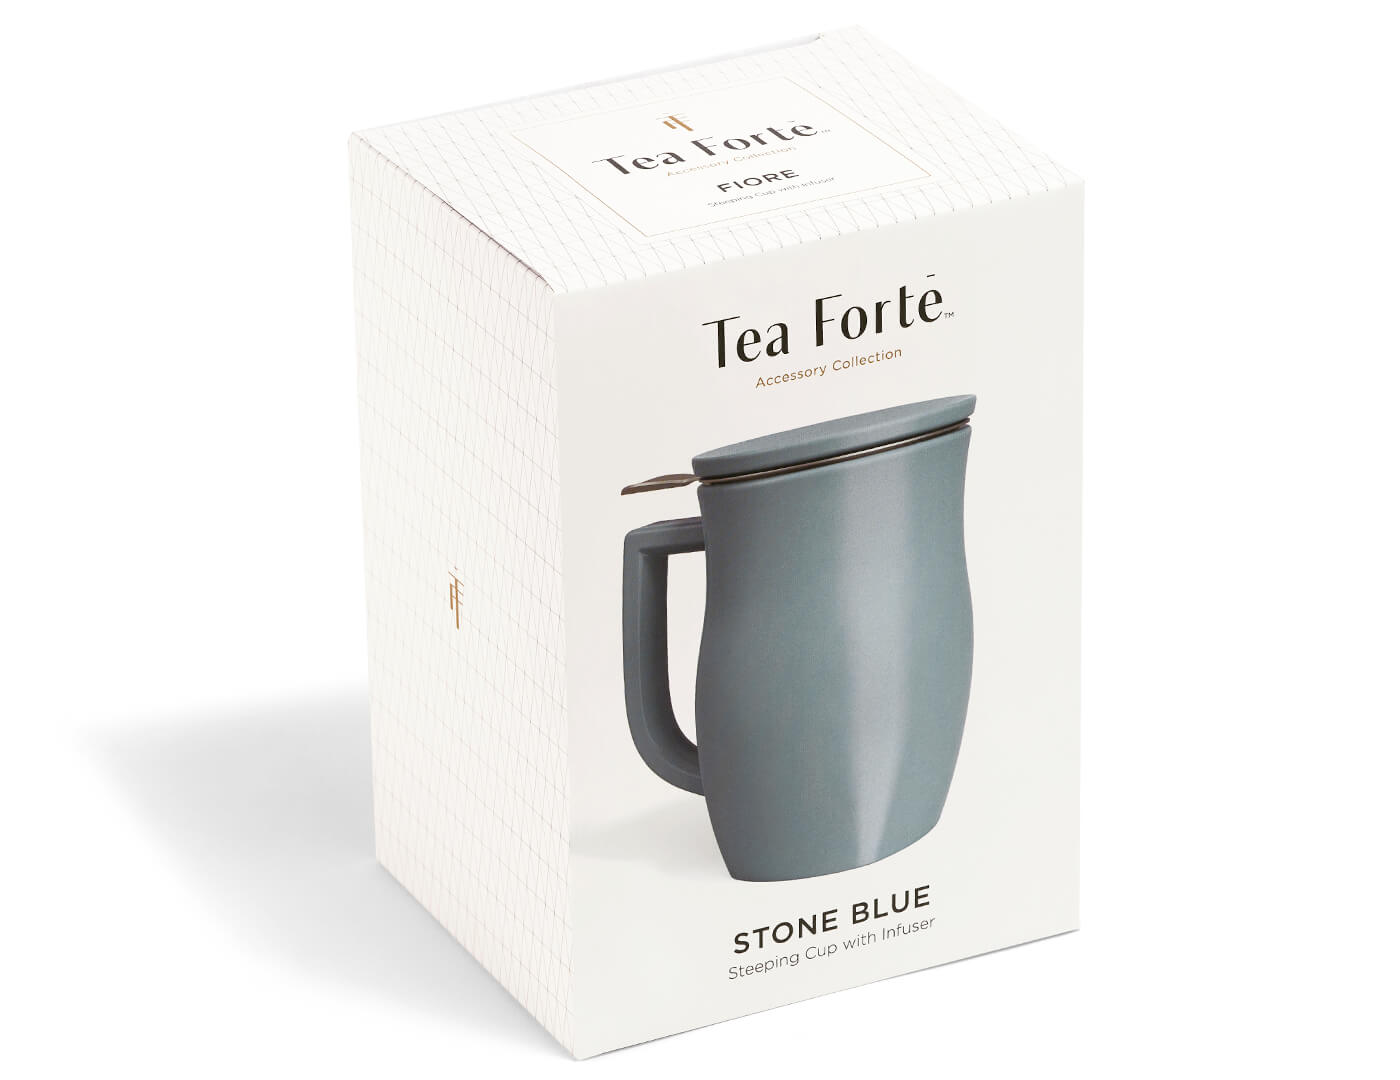 GIft Box, Fiore Steeping Cup and infuser in Stone Blue 